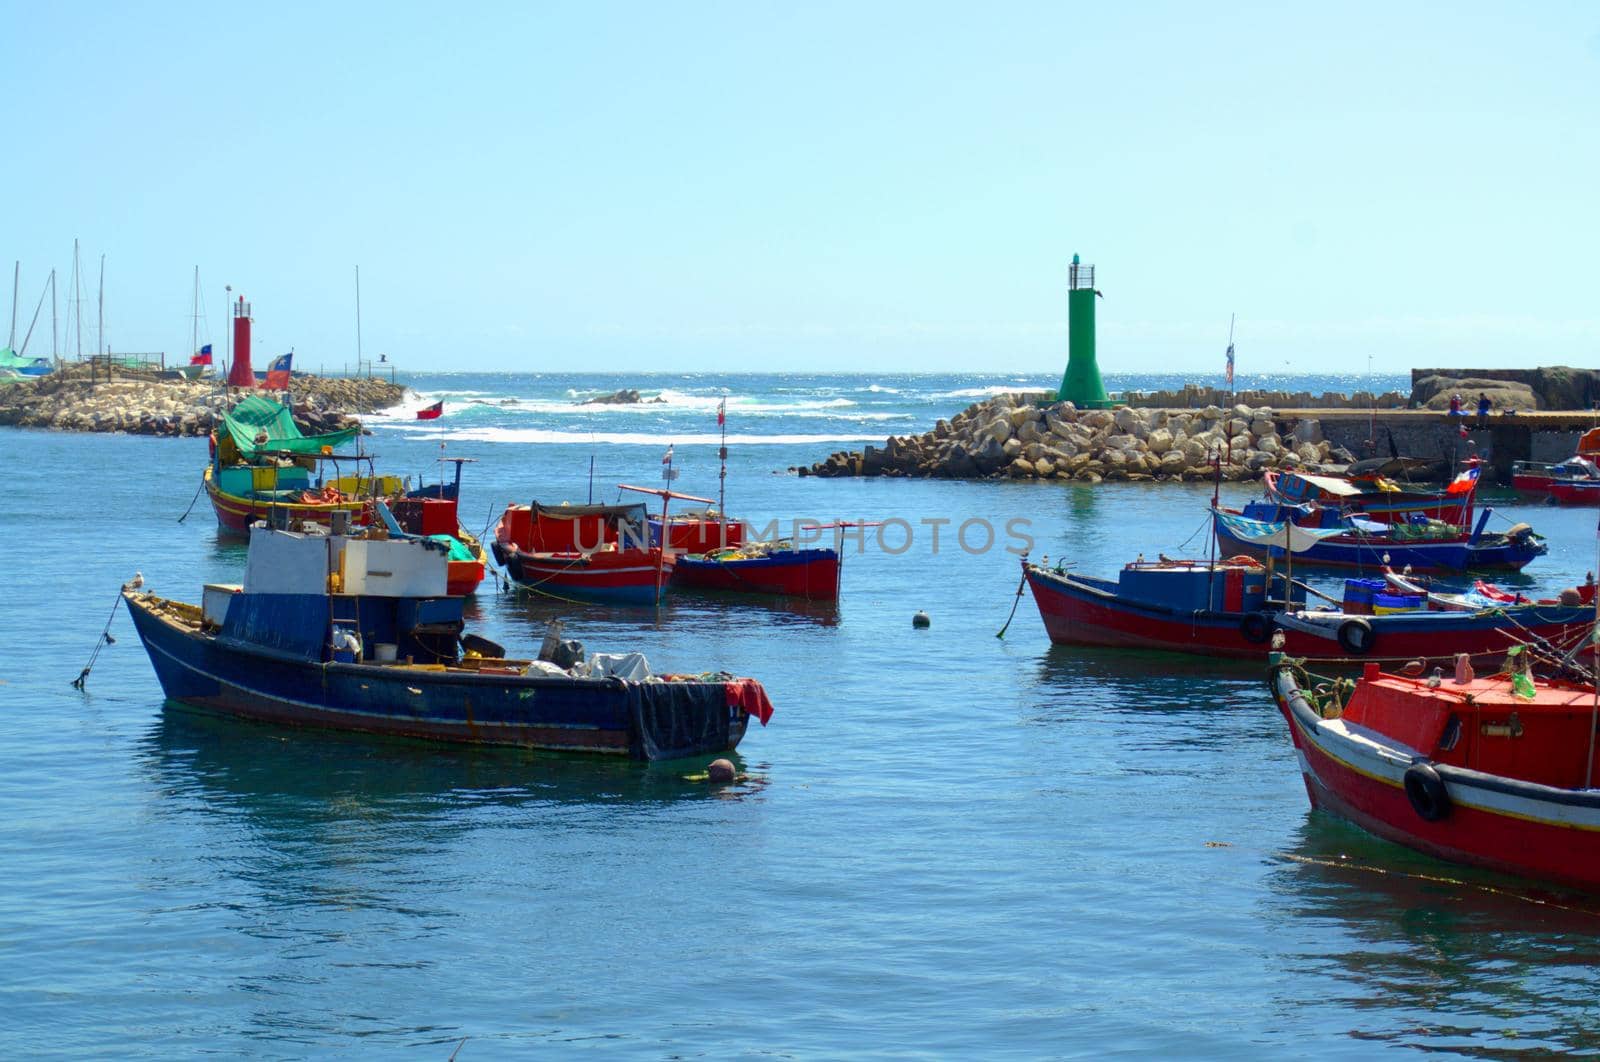 Fishing boats in the harbor of Antofagasta, Chile by hernan_hyper